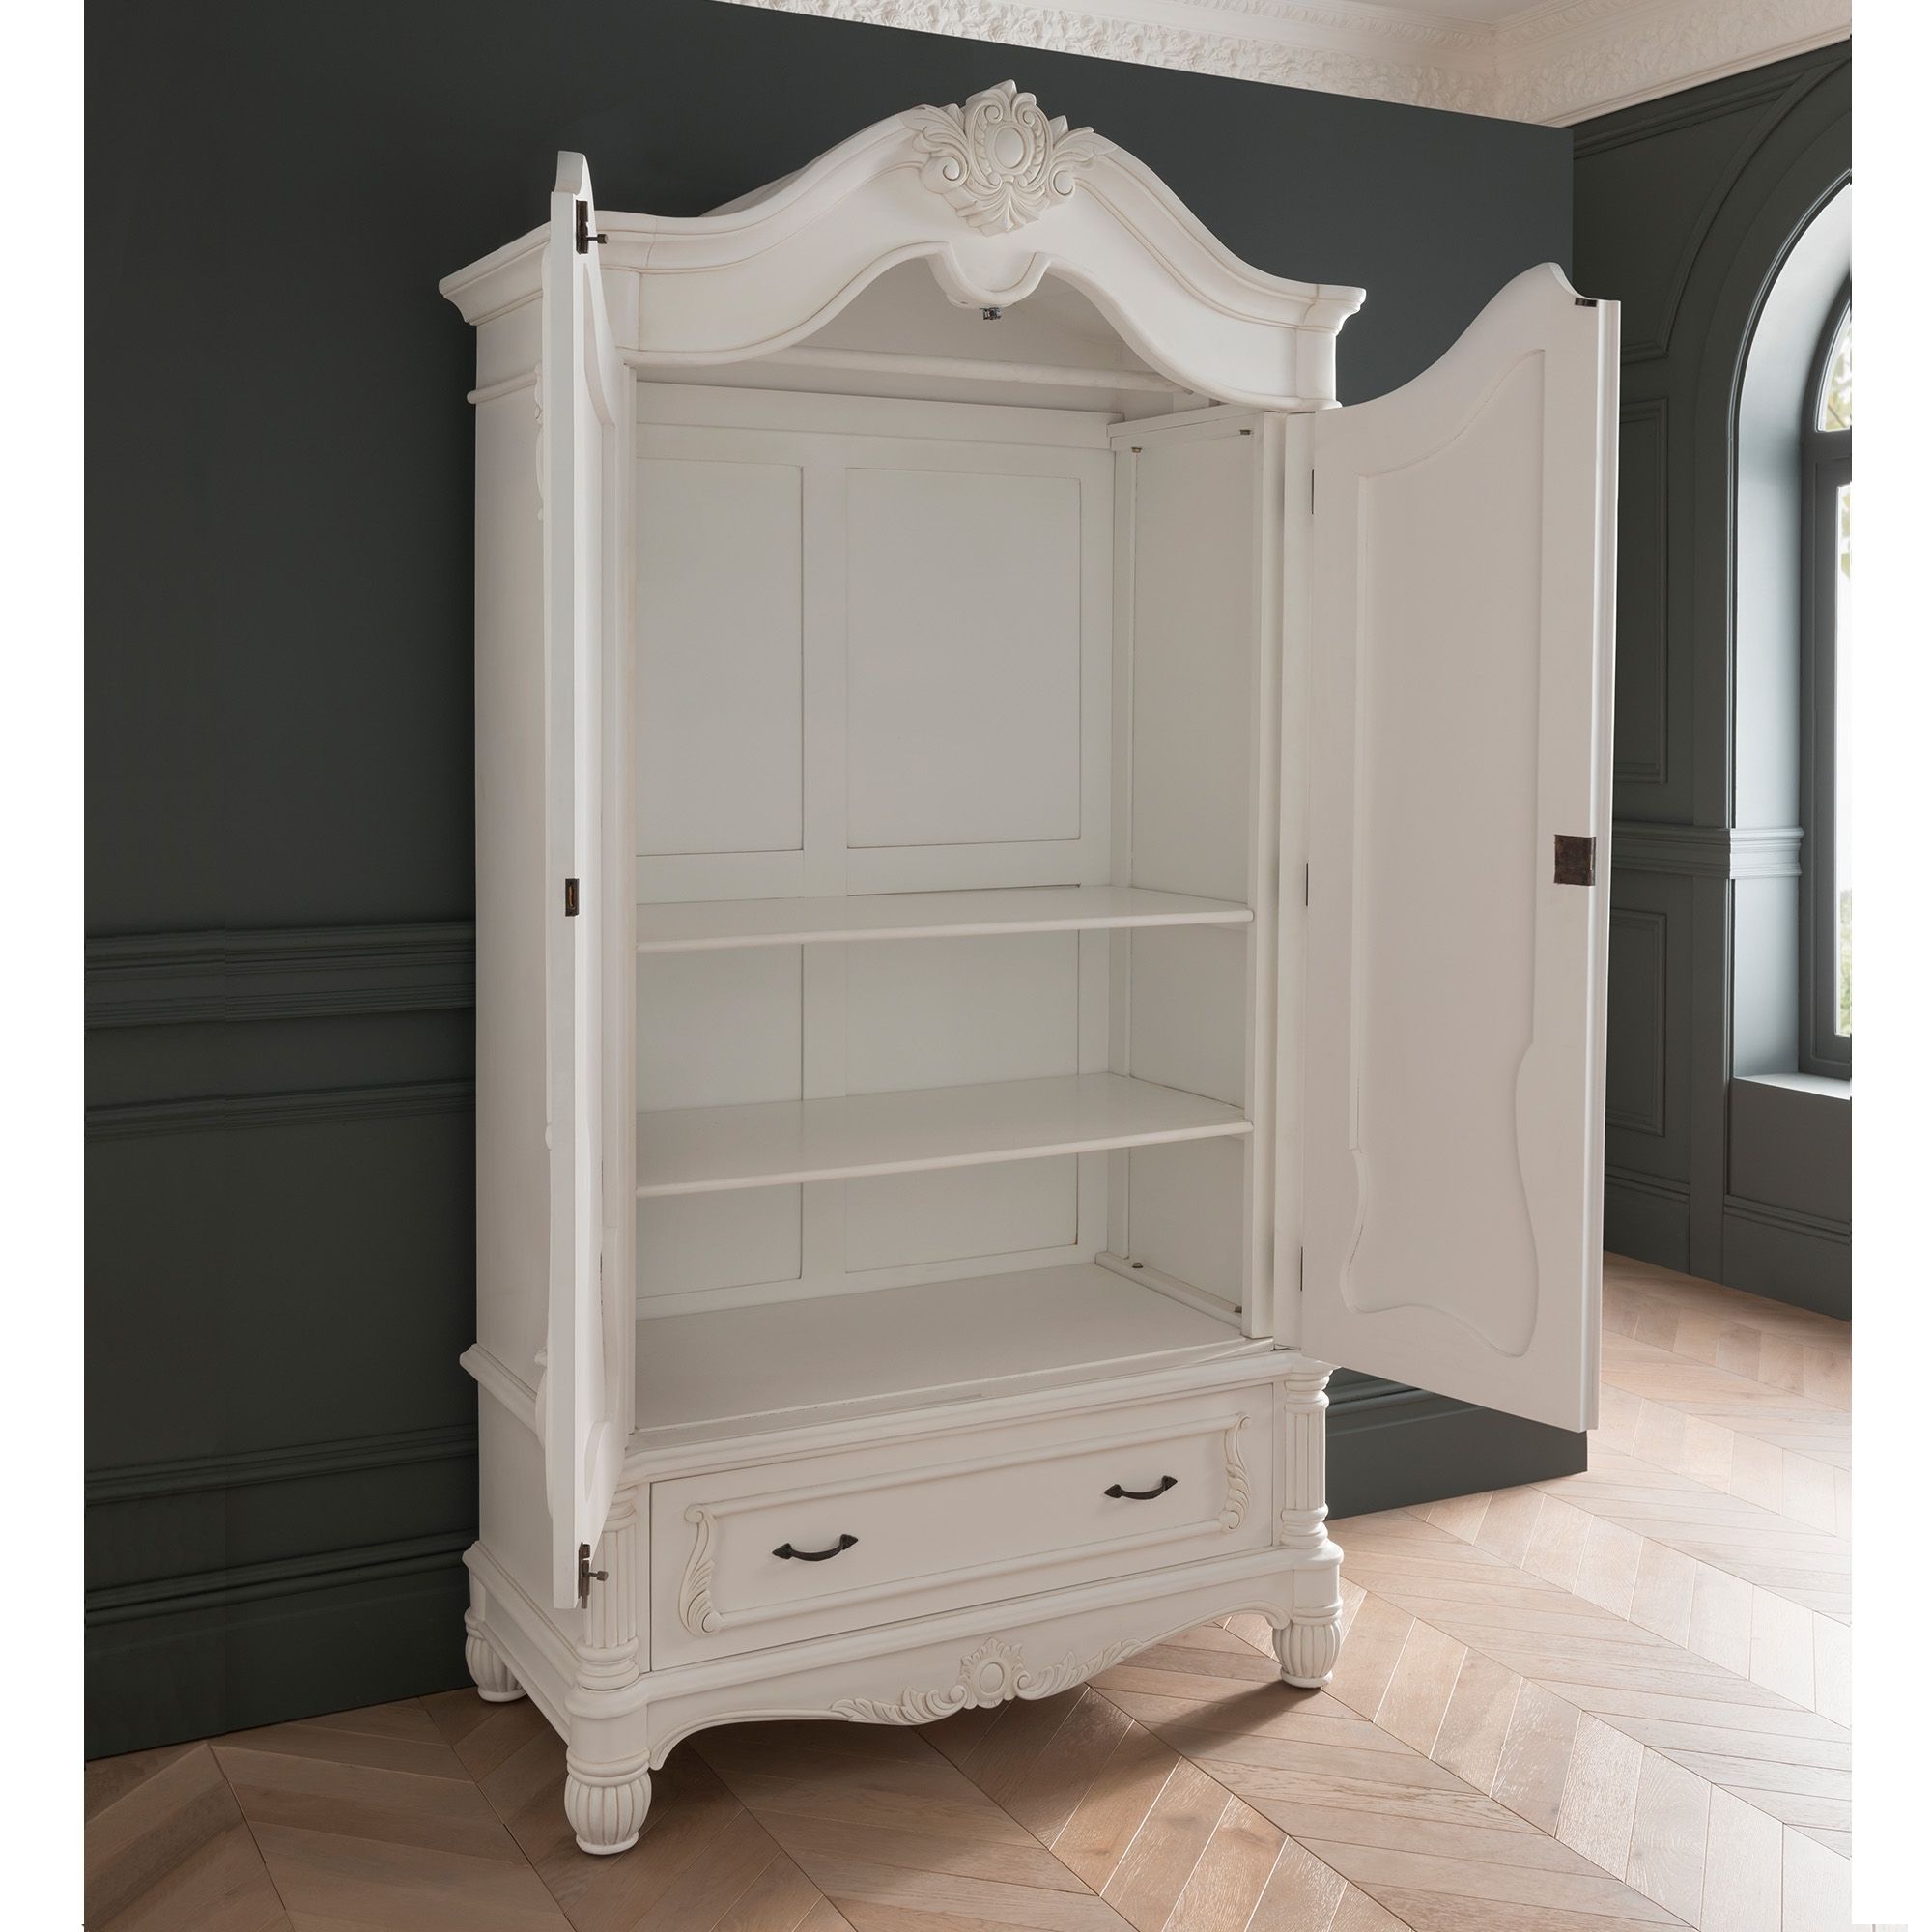 Antique French Style White Finished 1 Drawer Wardrobe | Homesdirect365 Within Antique Single Wardrobes (View 16 of 20)